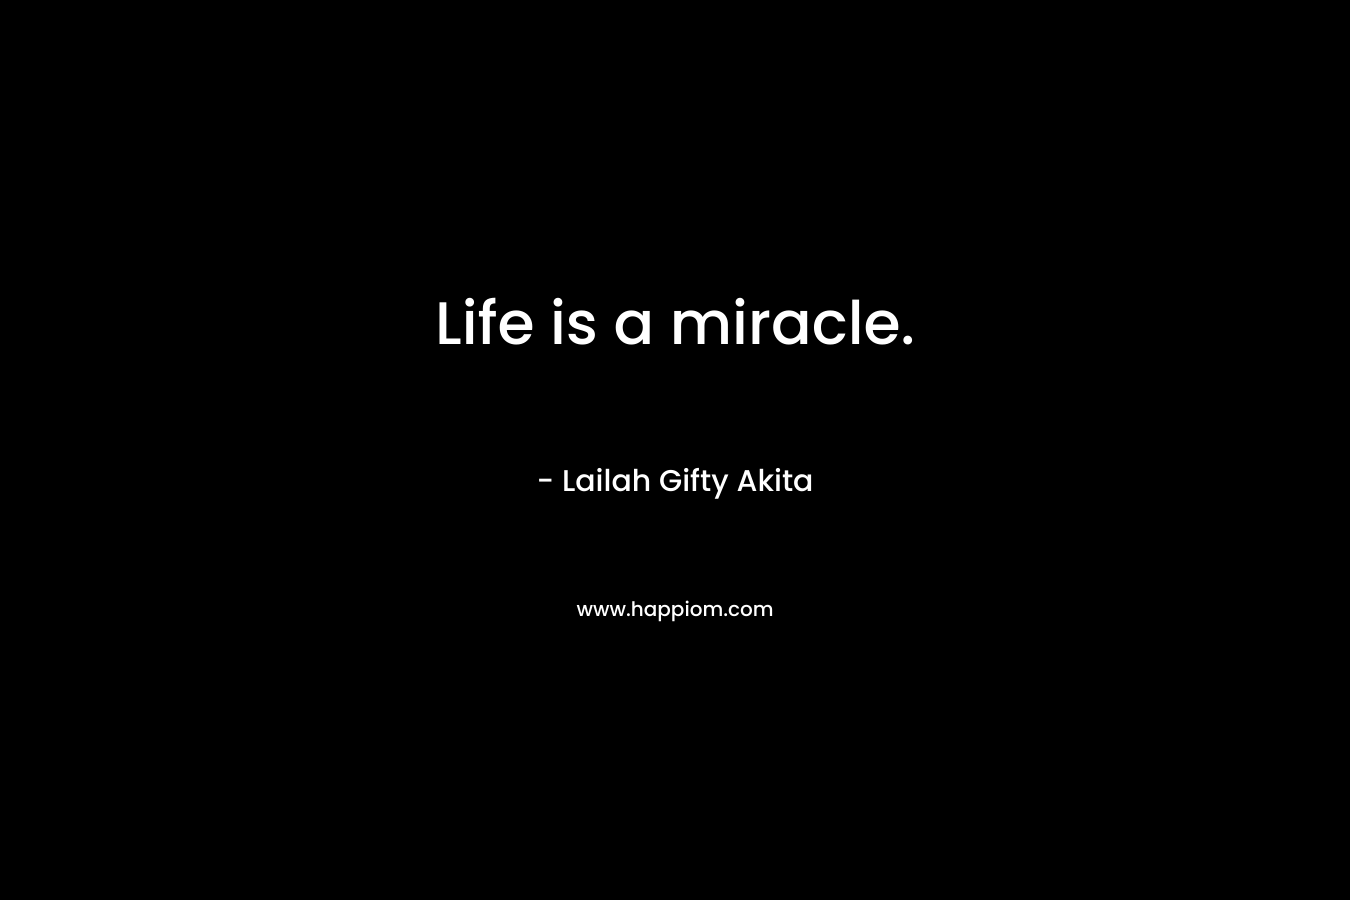 Life is a miracle.